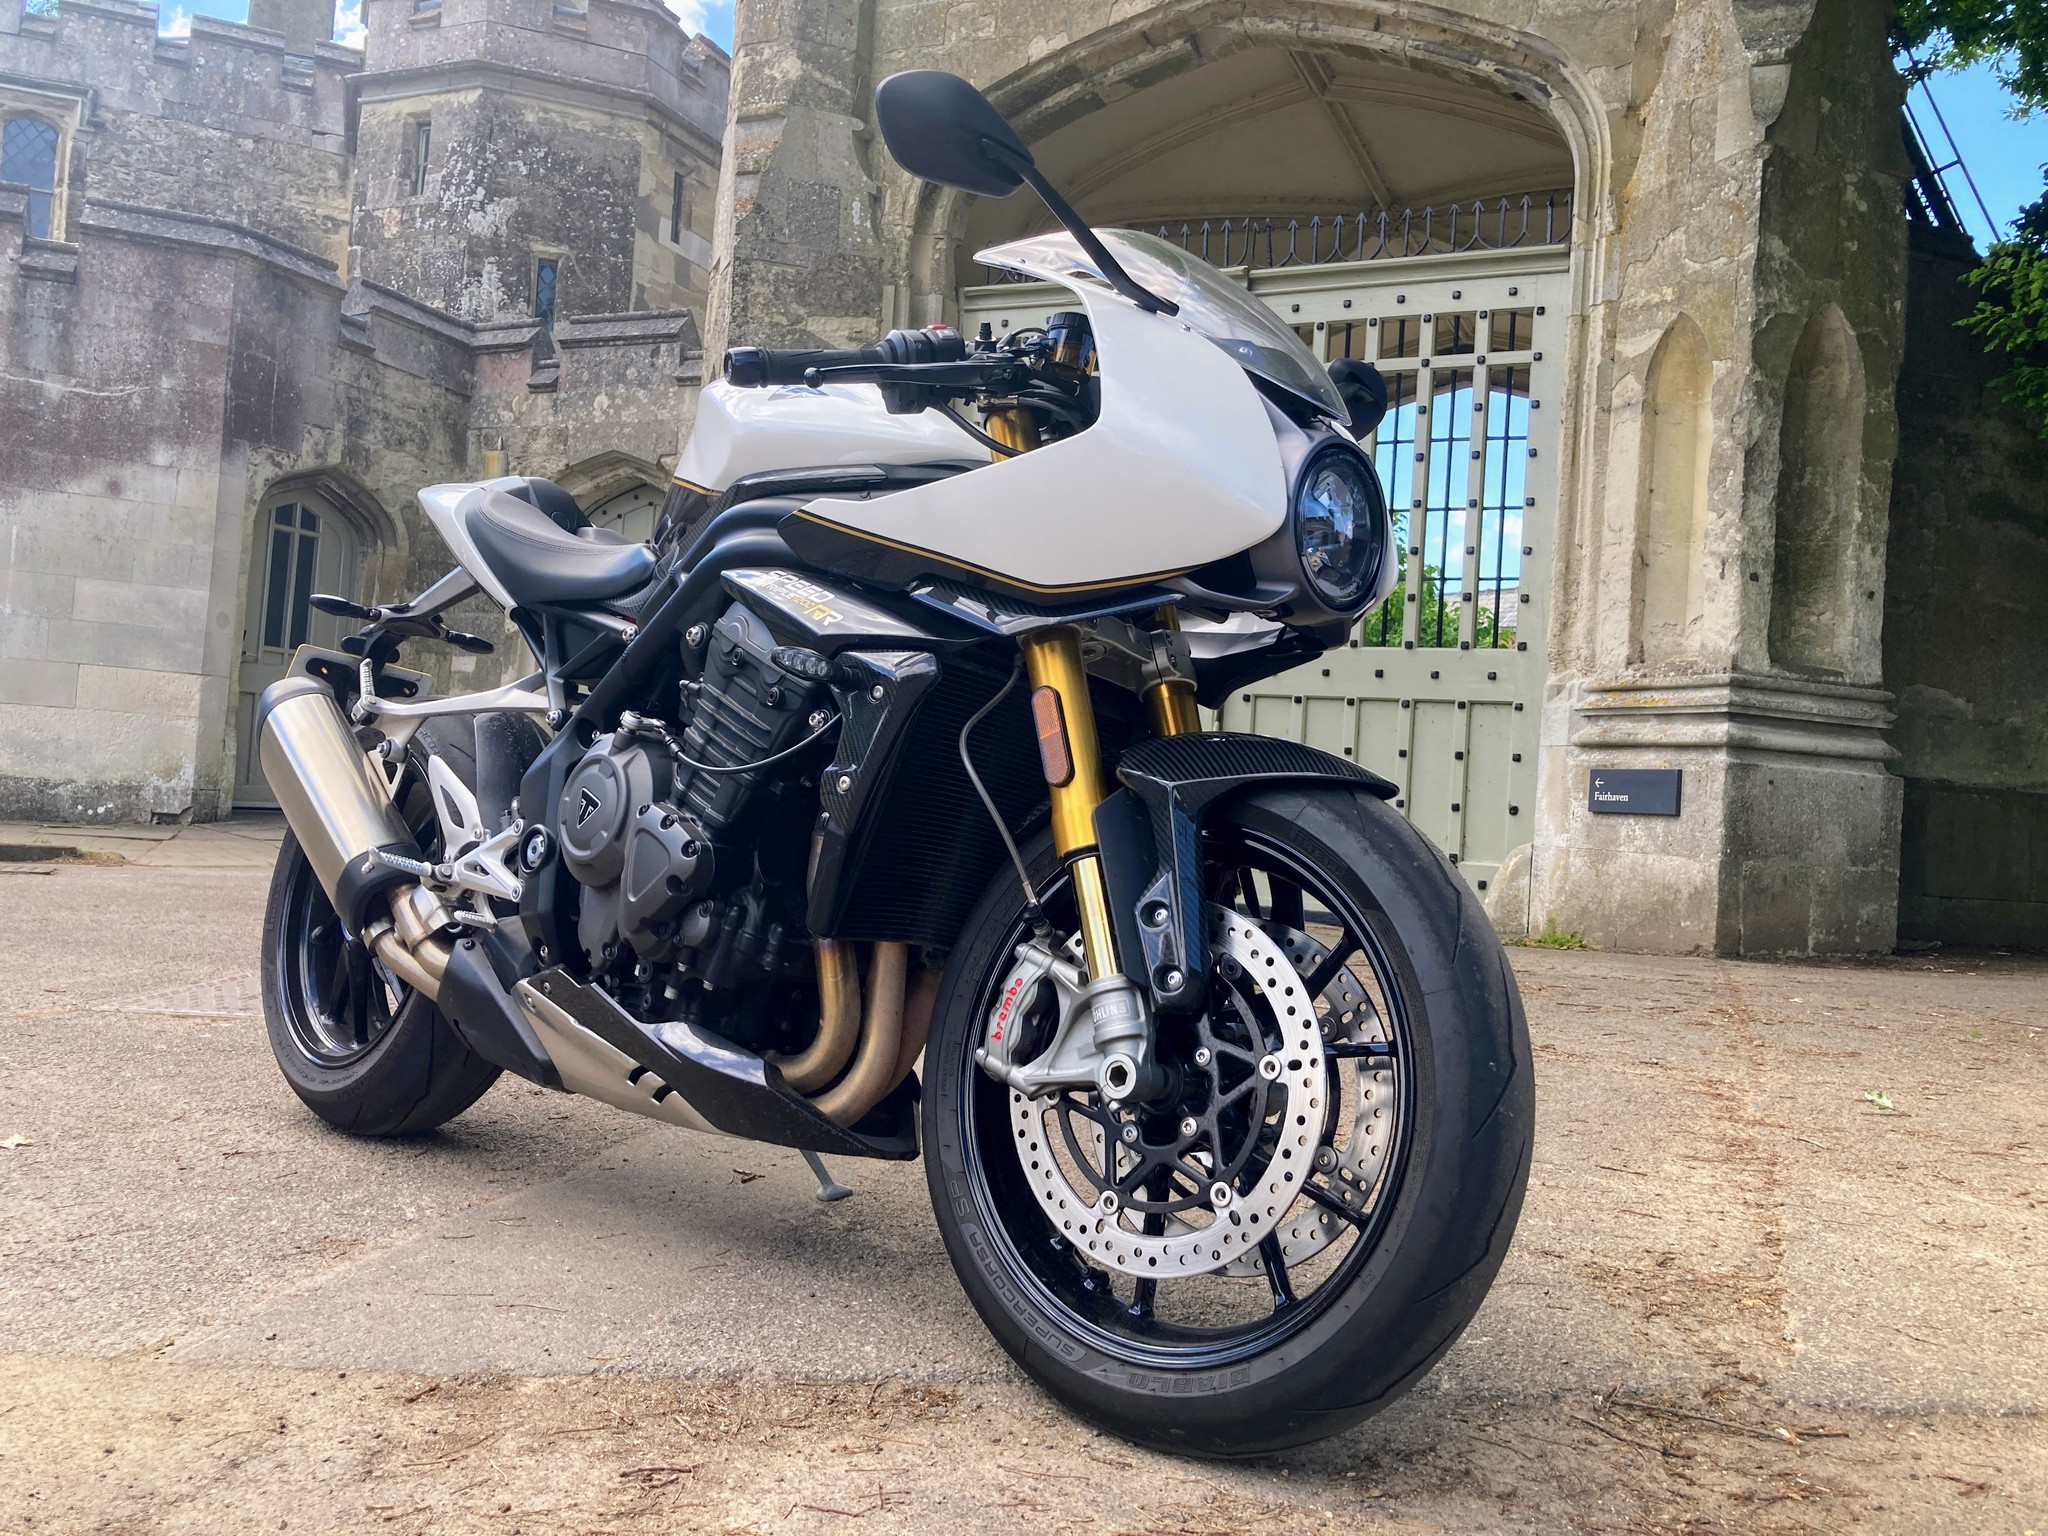 Front view of the Triumph Speed Triple RR